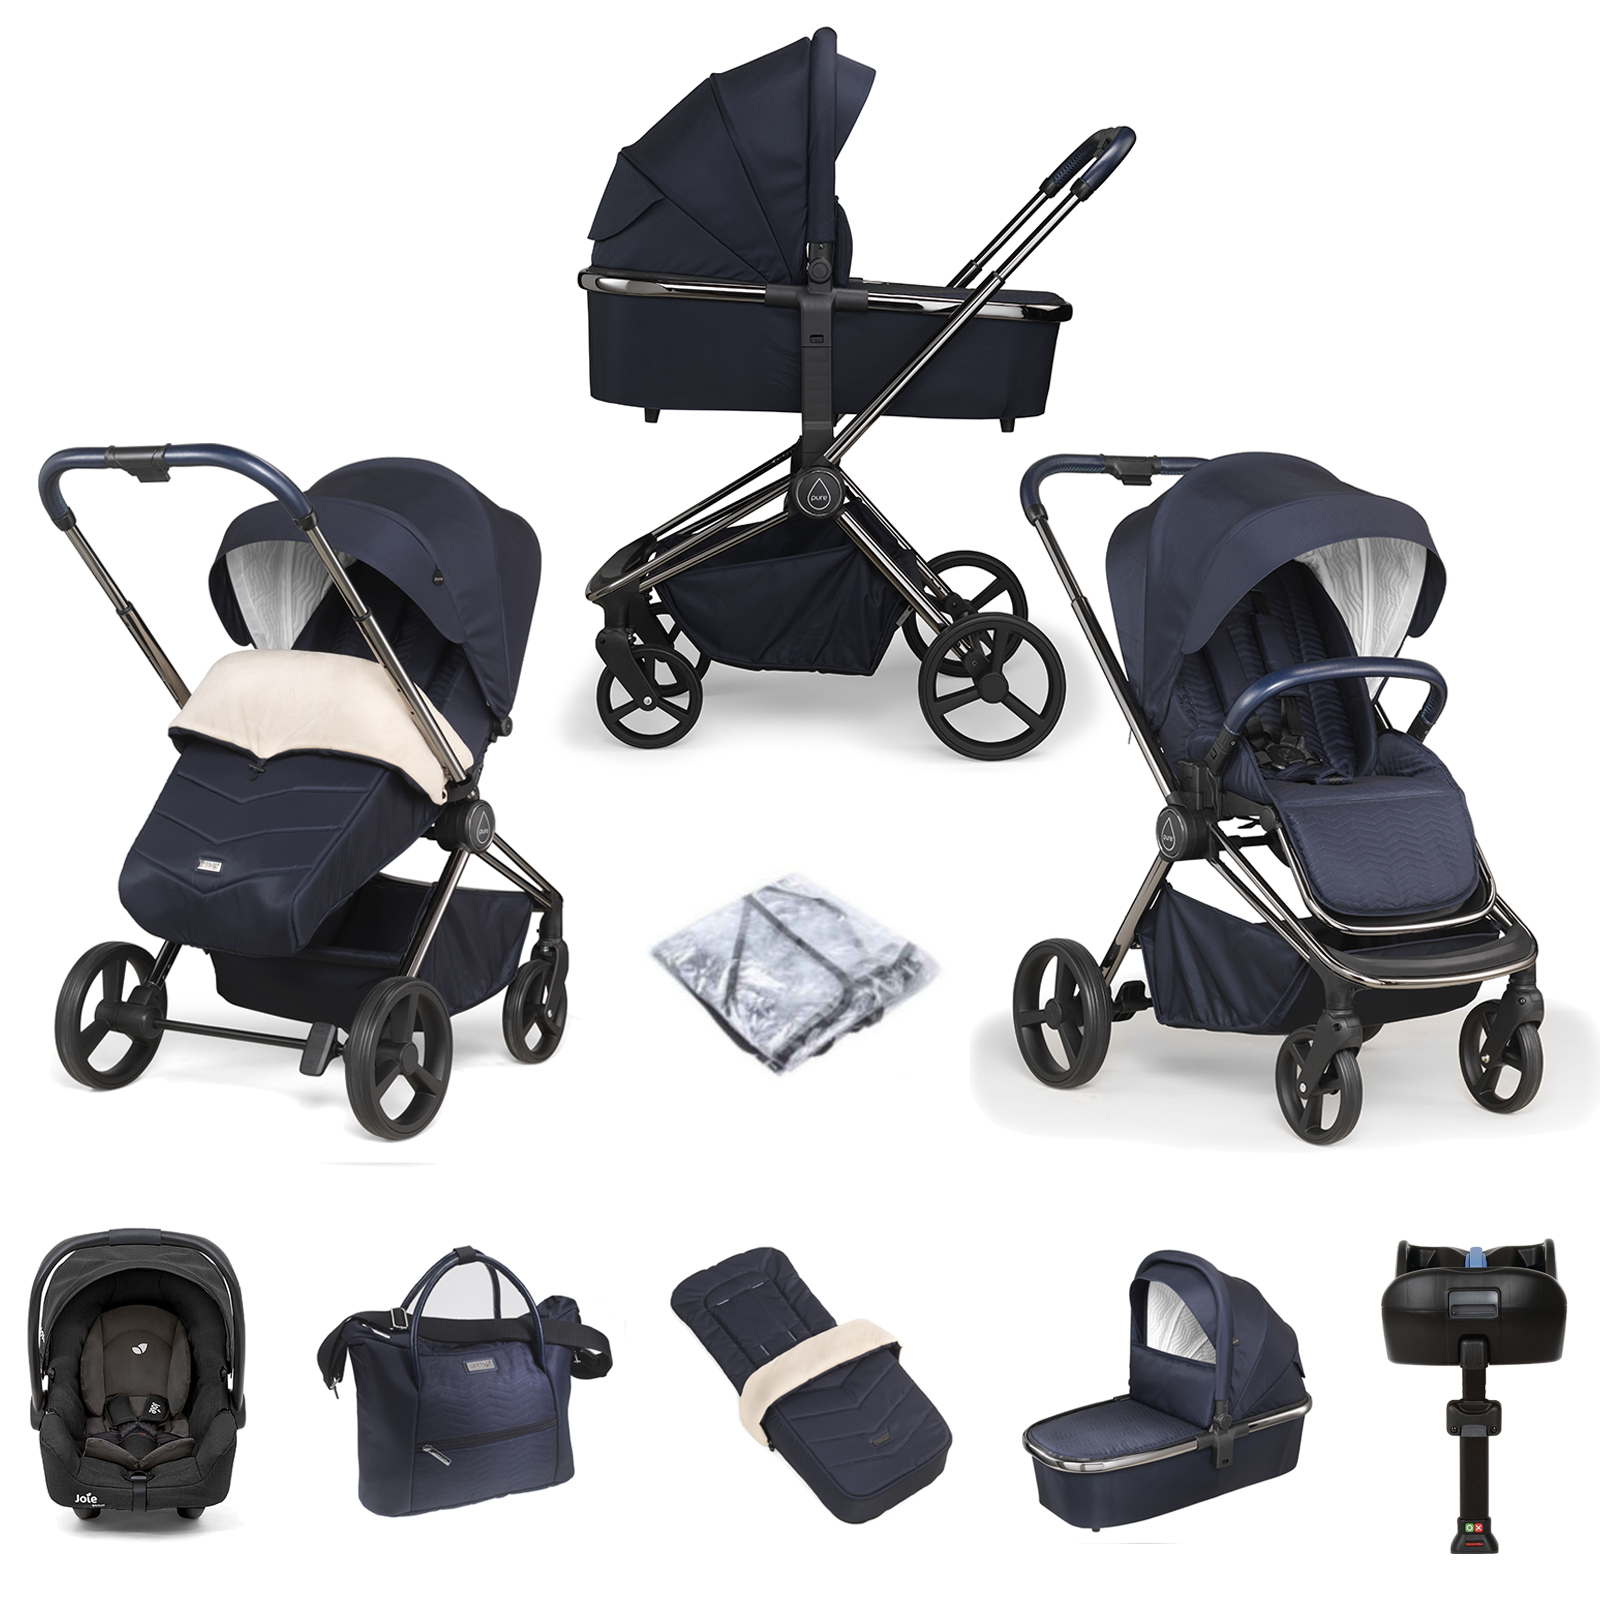 Mee-go Pure (Gemm) ISOFIX Base Travel System & Accessories - True Blue